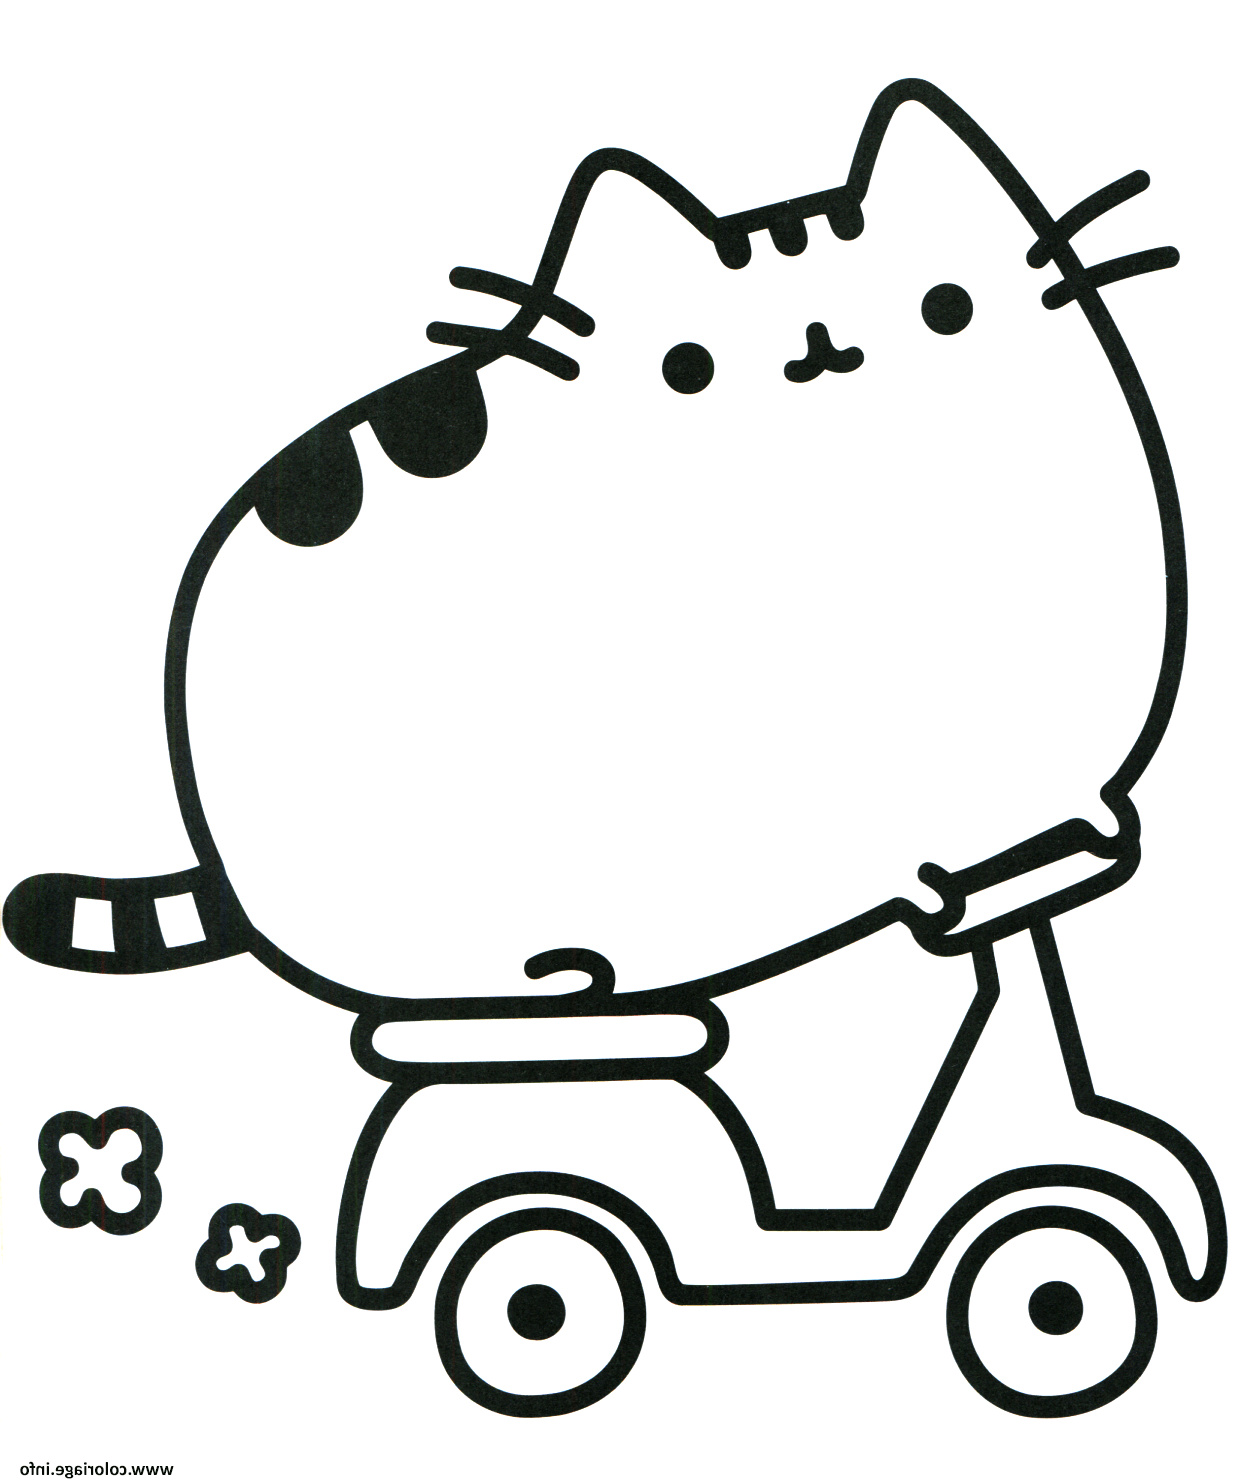 Coloriage Pusheen Inspirant Galerie Coloriage Pusheen Cat On Scooter Jecolorie